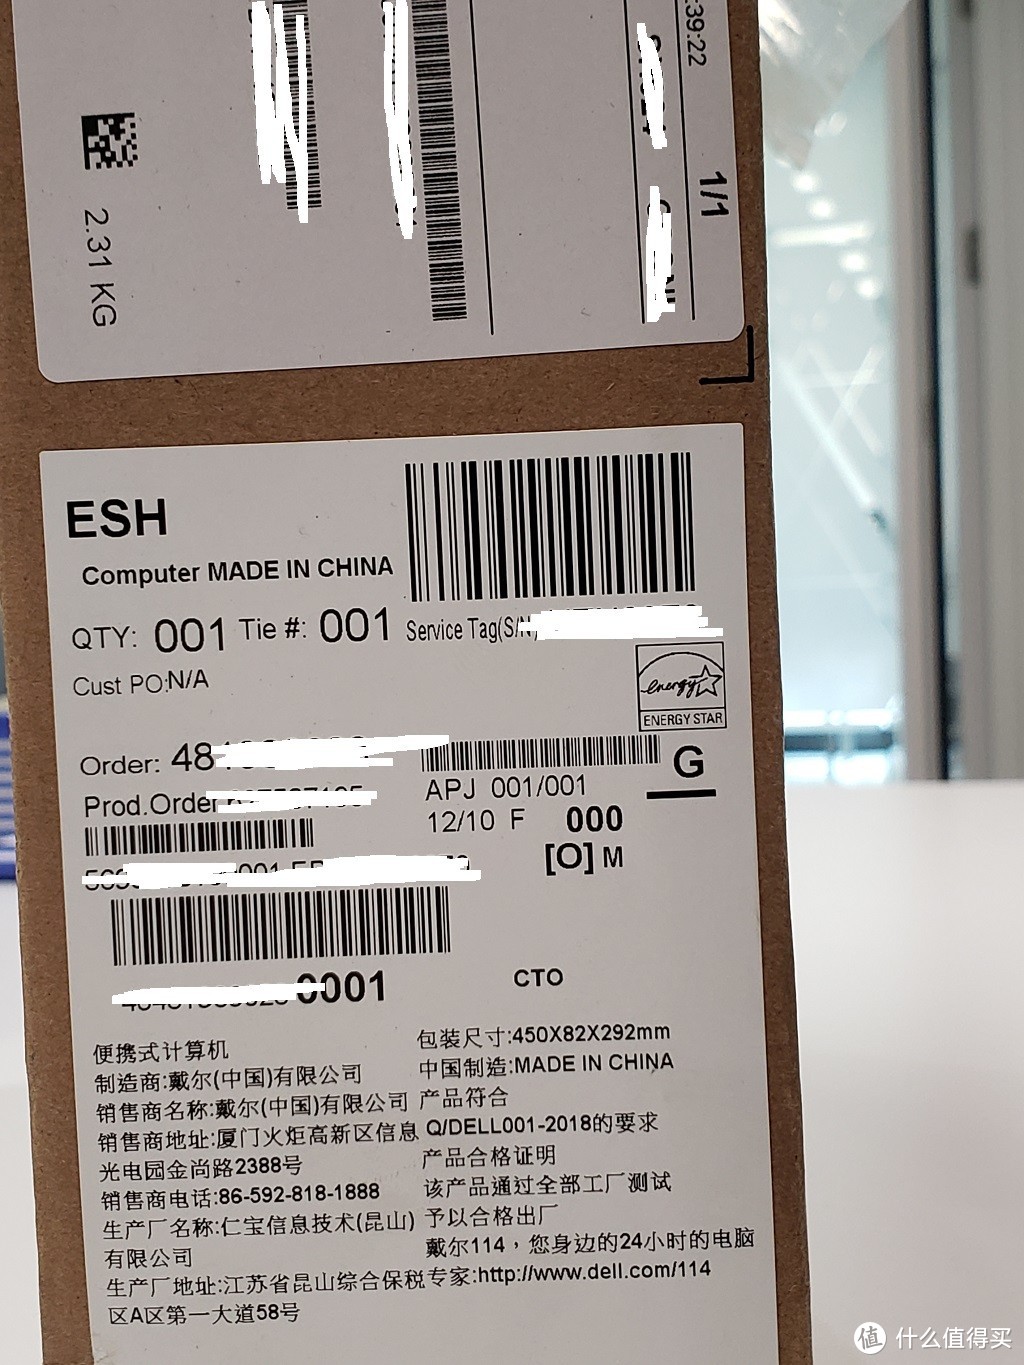 2019 Dell XPS13 7390迟到的开箱